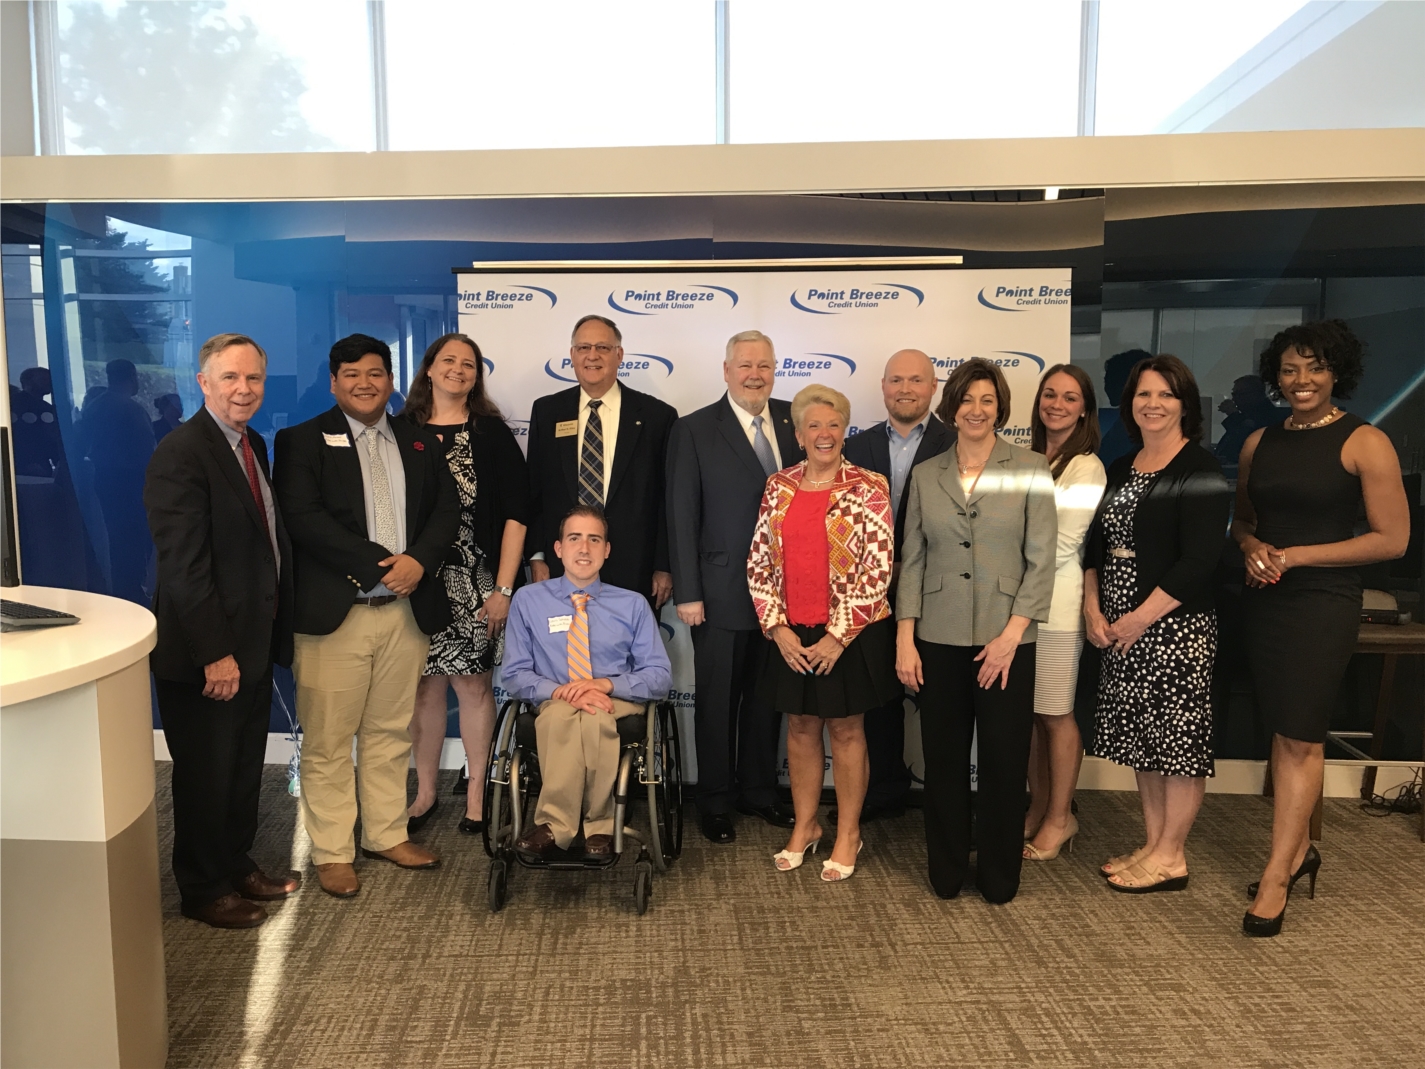 Finalists and judges at the Point Breeze Community Care Challenge event to celebrate our new Westminster office. MAGIC was presented with $10,000 and four finalists received $1,935 each toward their ideas for improving Carroll County.